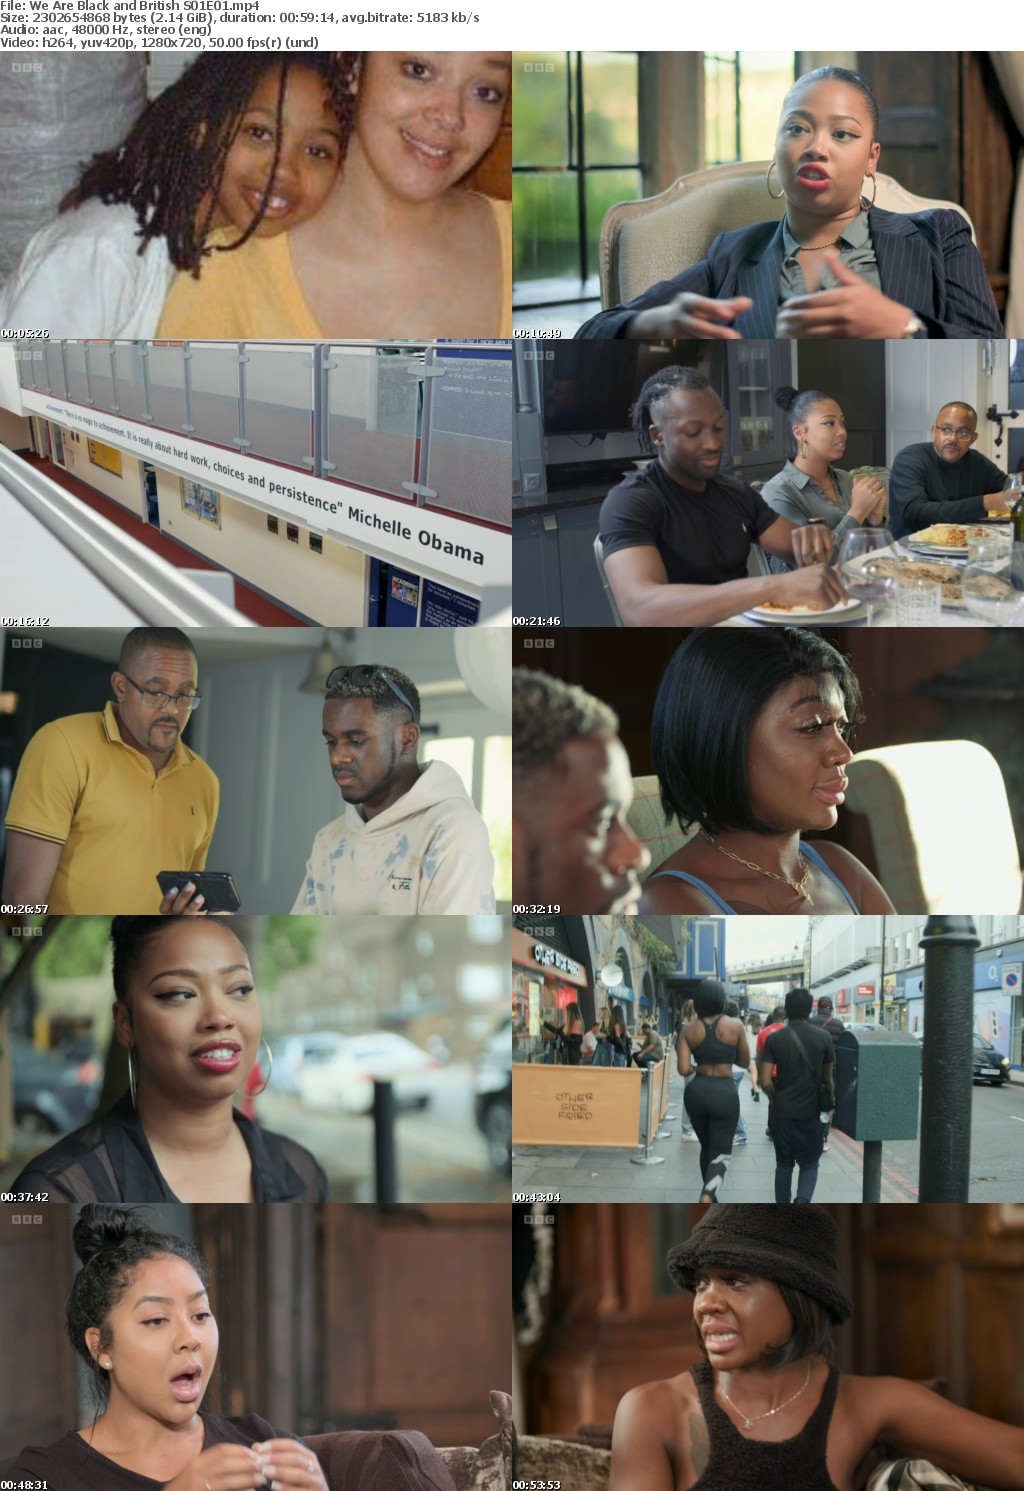 We Are Black and British S01E01 (1280x720p HD, 50fps, soft Eng subs)